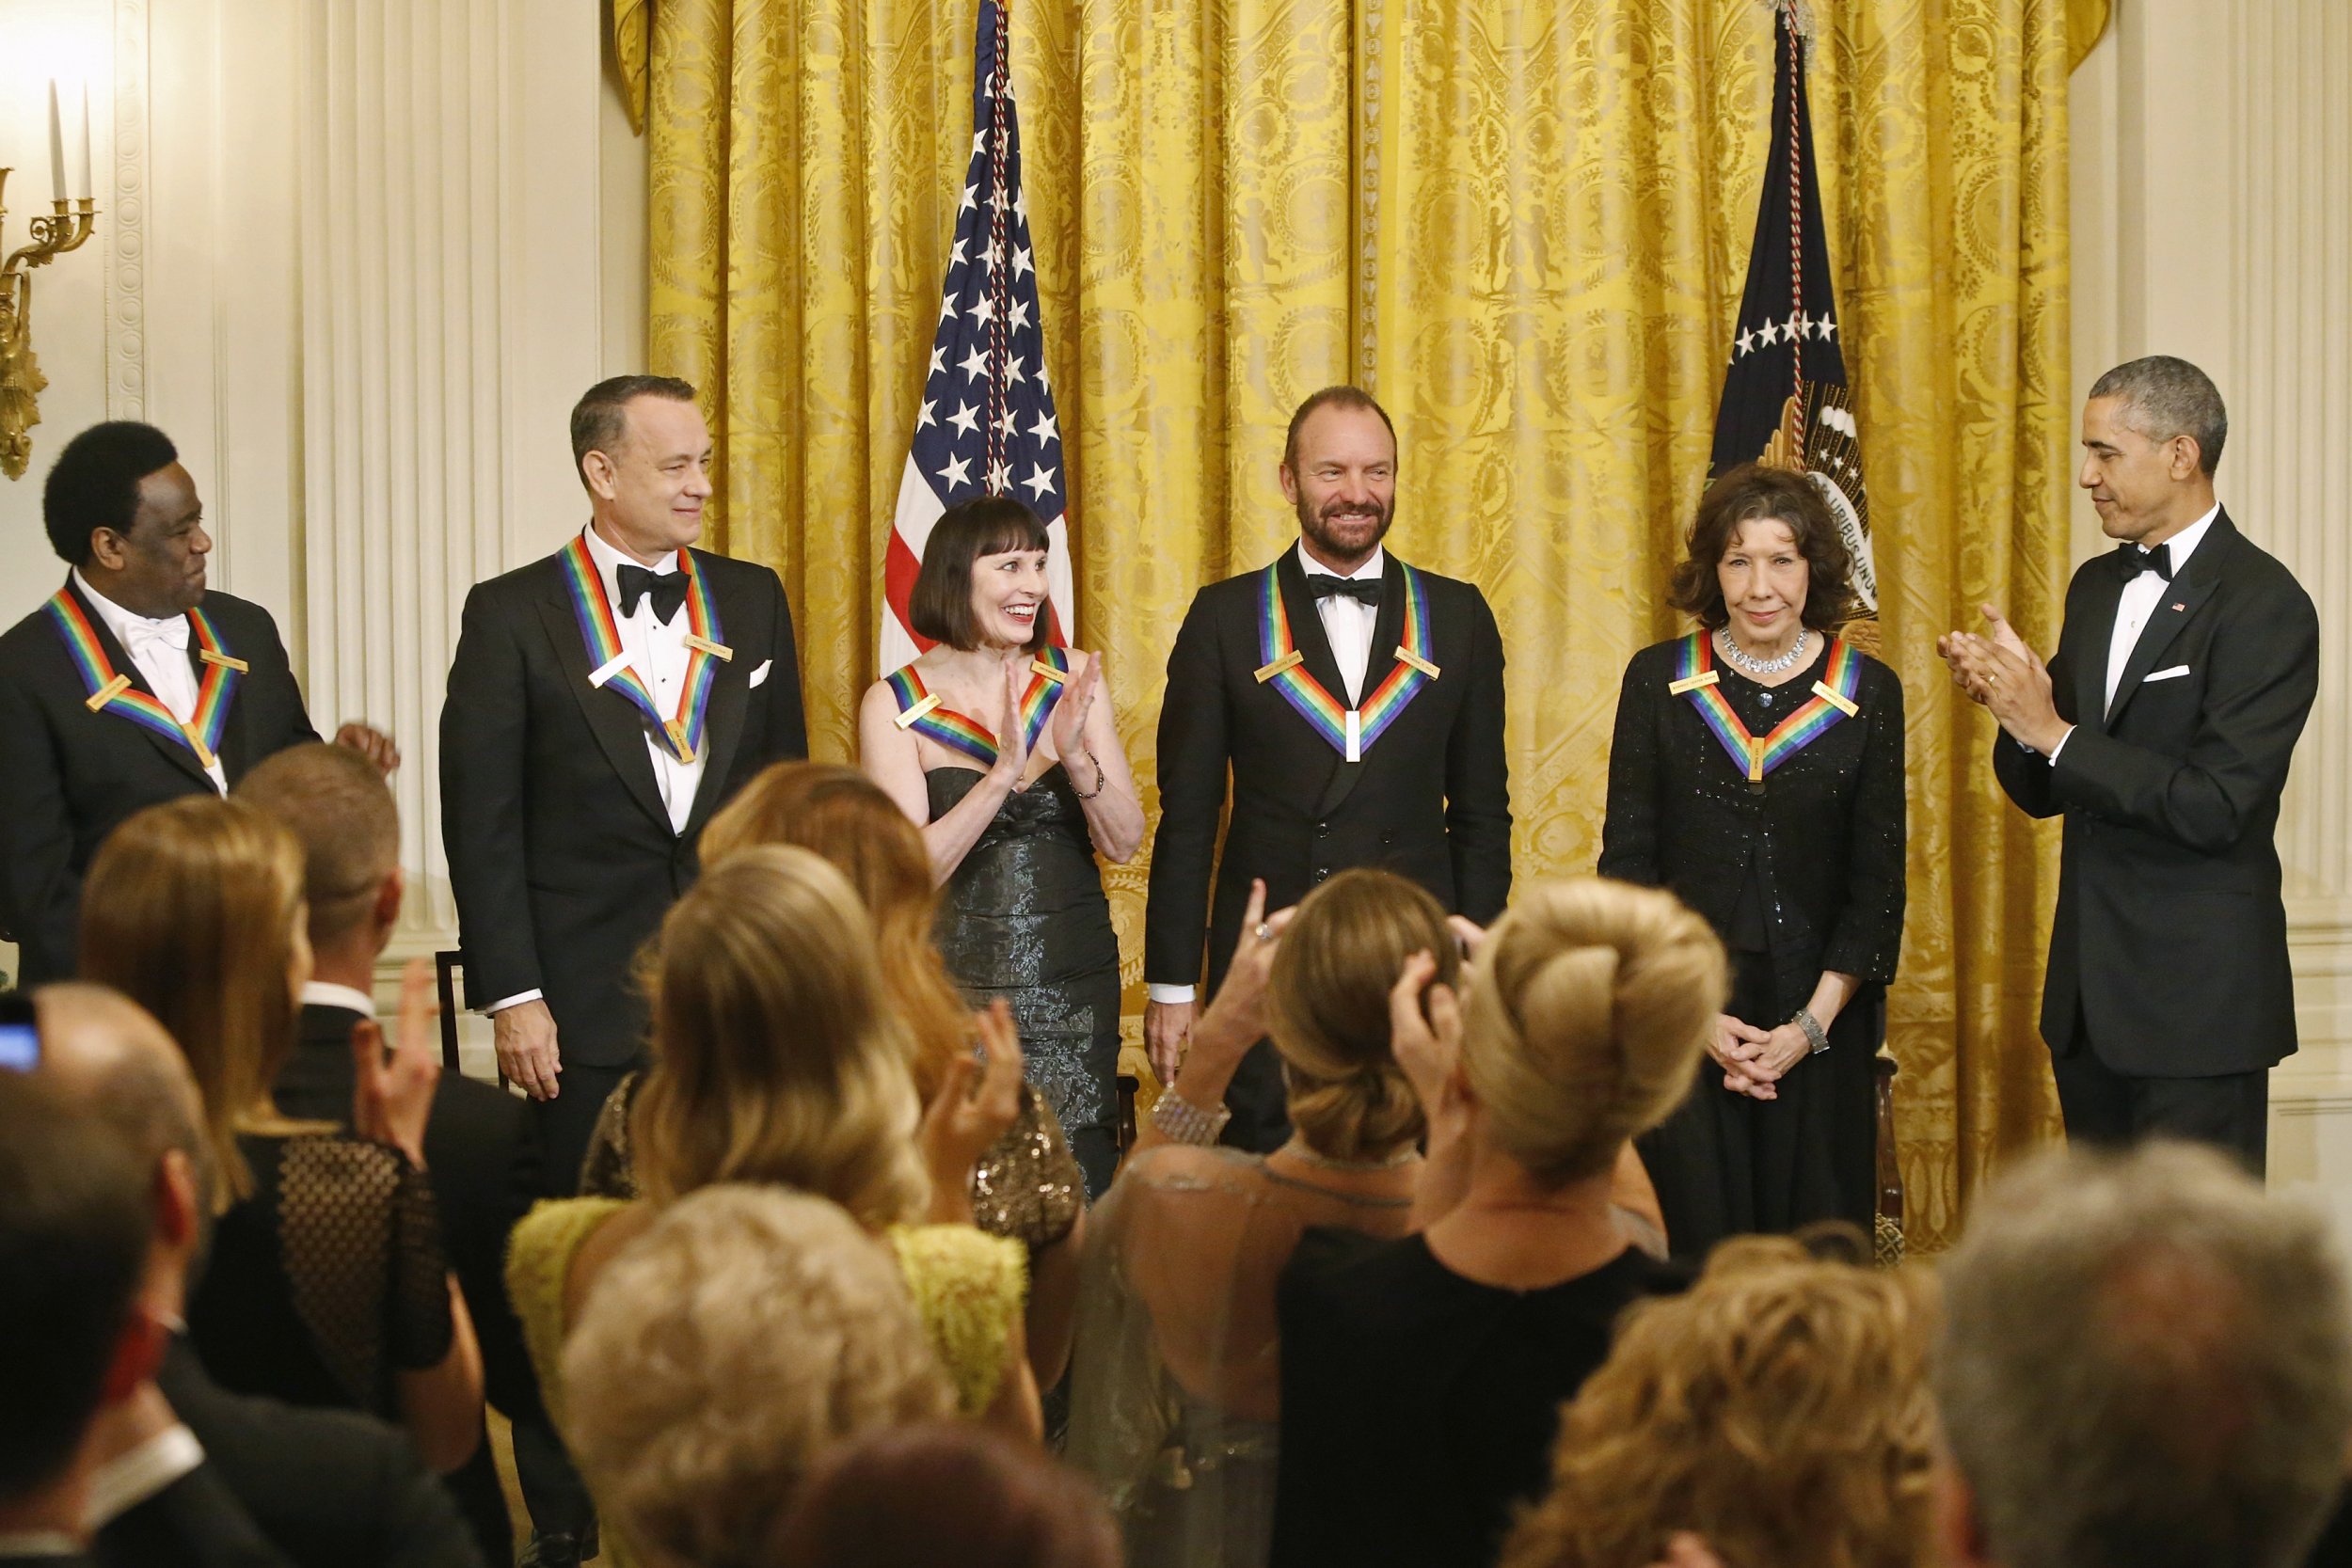 Kennedy Center Honors In Photos Tom Hanks, Sting, Al Green Among Those